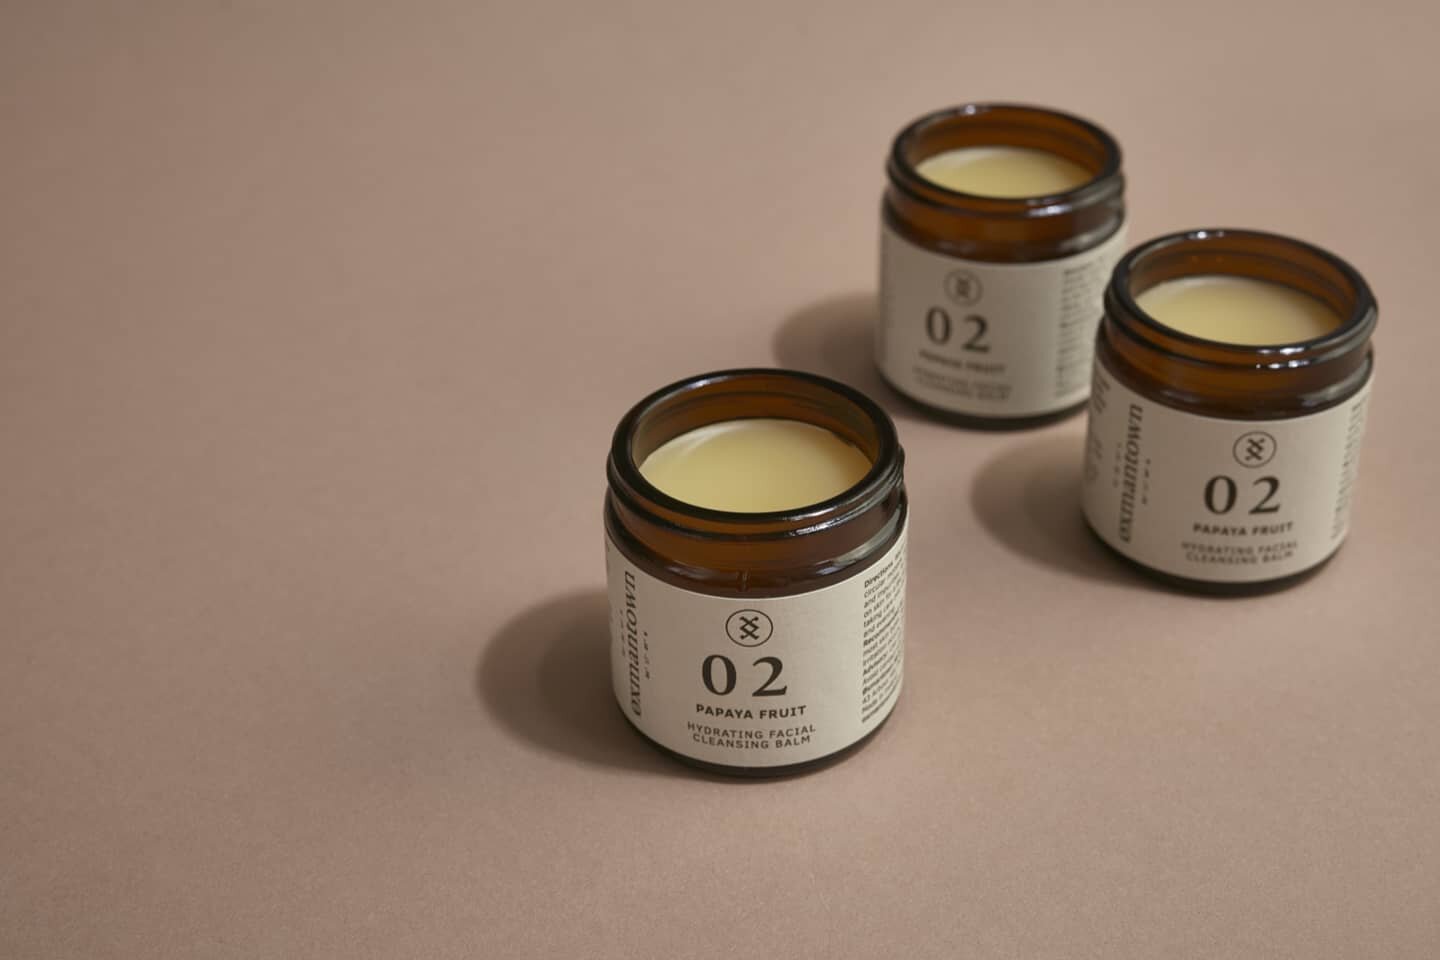 Bank Holiday Flash Sale 💫

Enjoy 10% of our entire range using the code: MAY2021

Sale ends midnight tonight! 

Free shipping over &euro;60
.
.
.
.
.
#oxmantownskincare
#natural #skincare #skin # wellness #irishskincare #irishmade #beauty